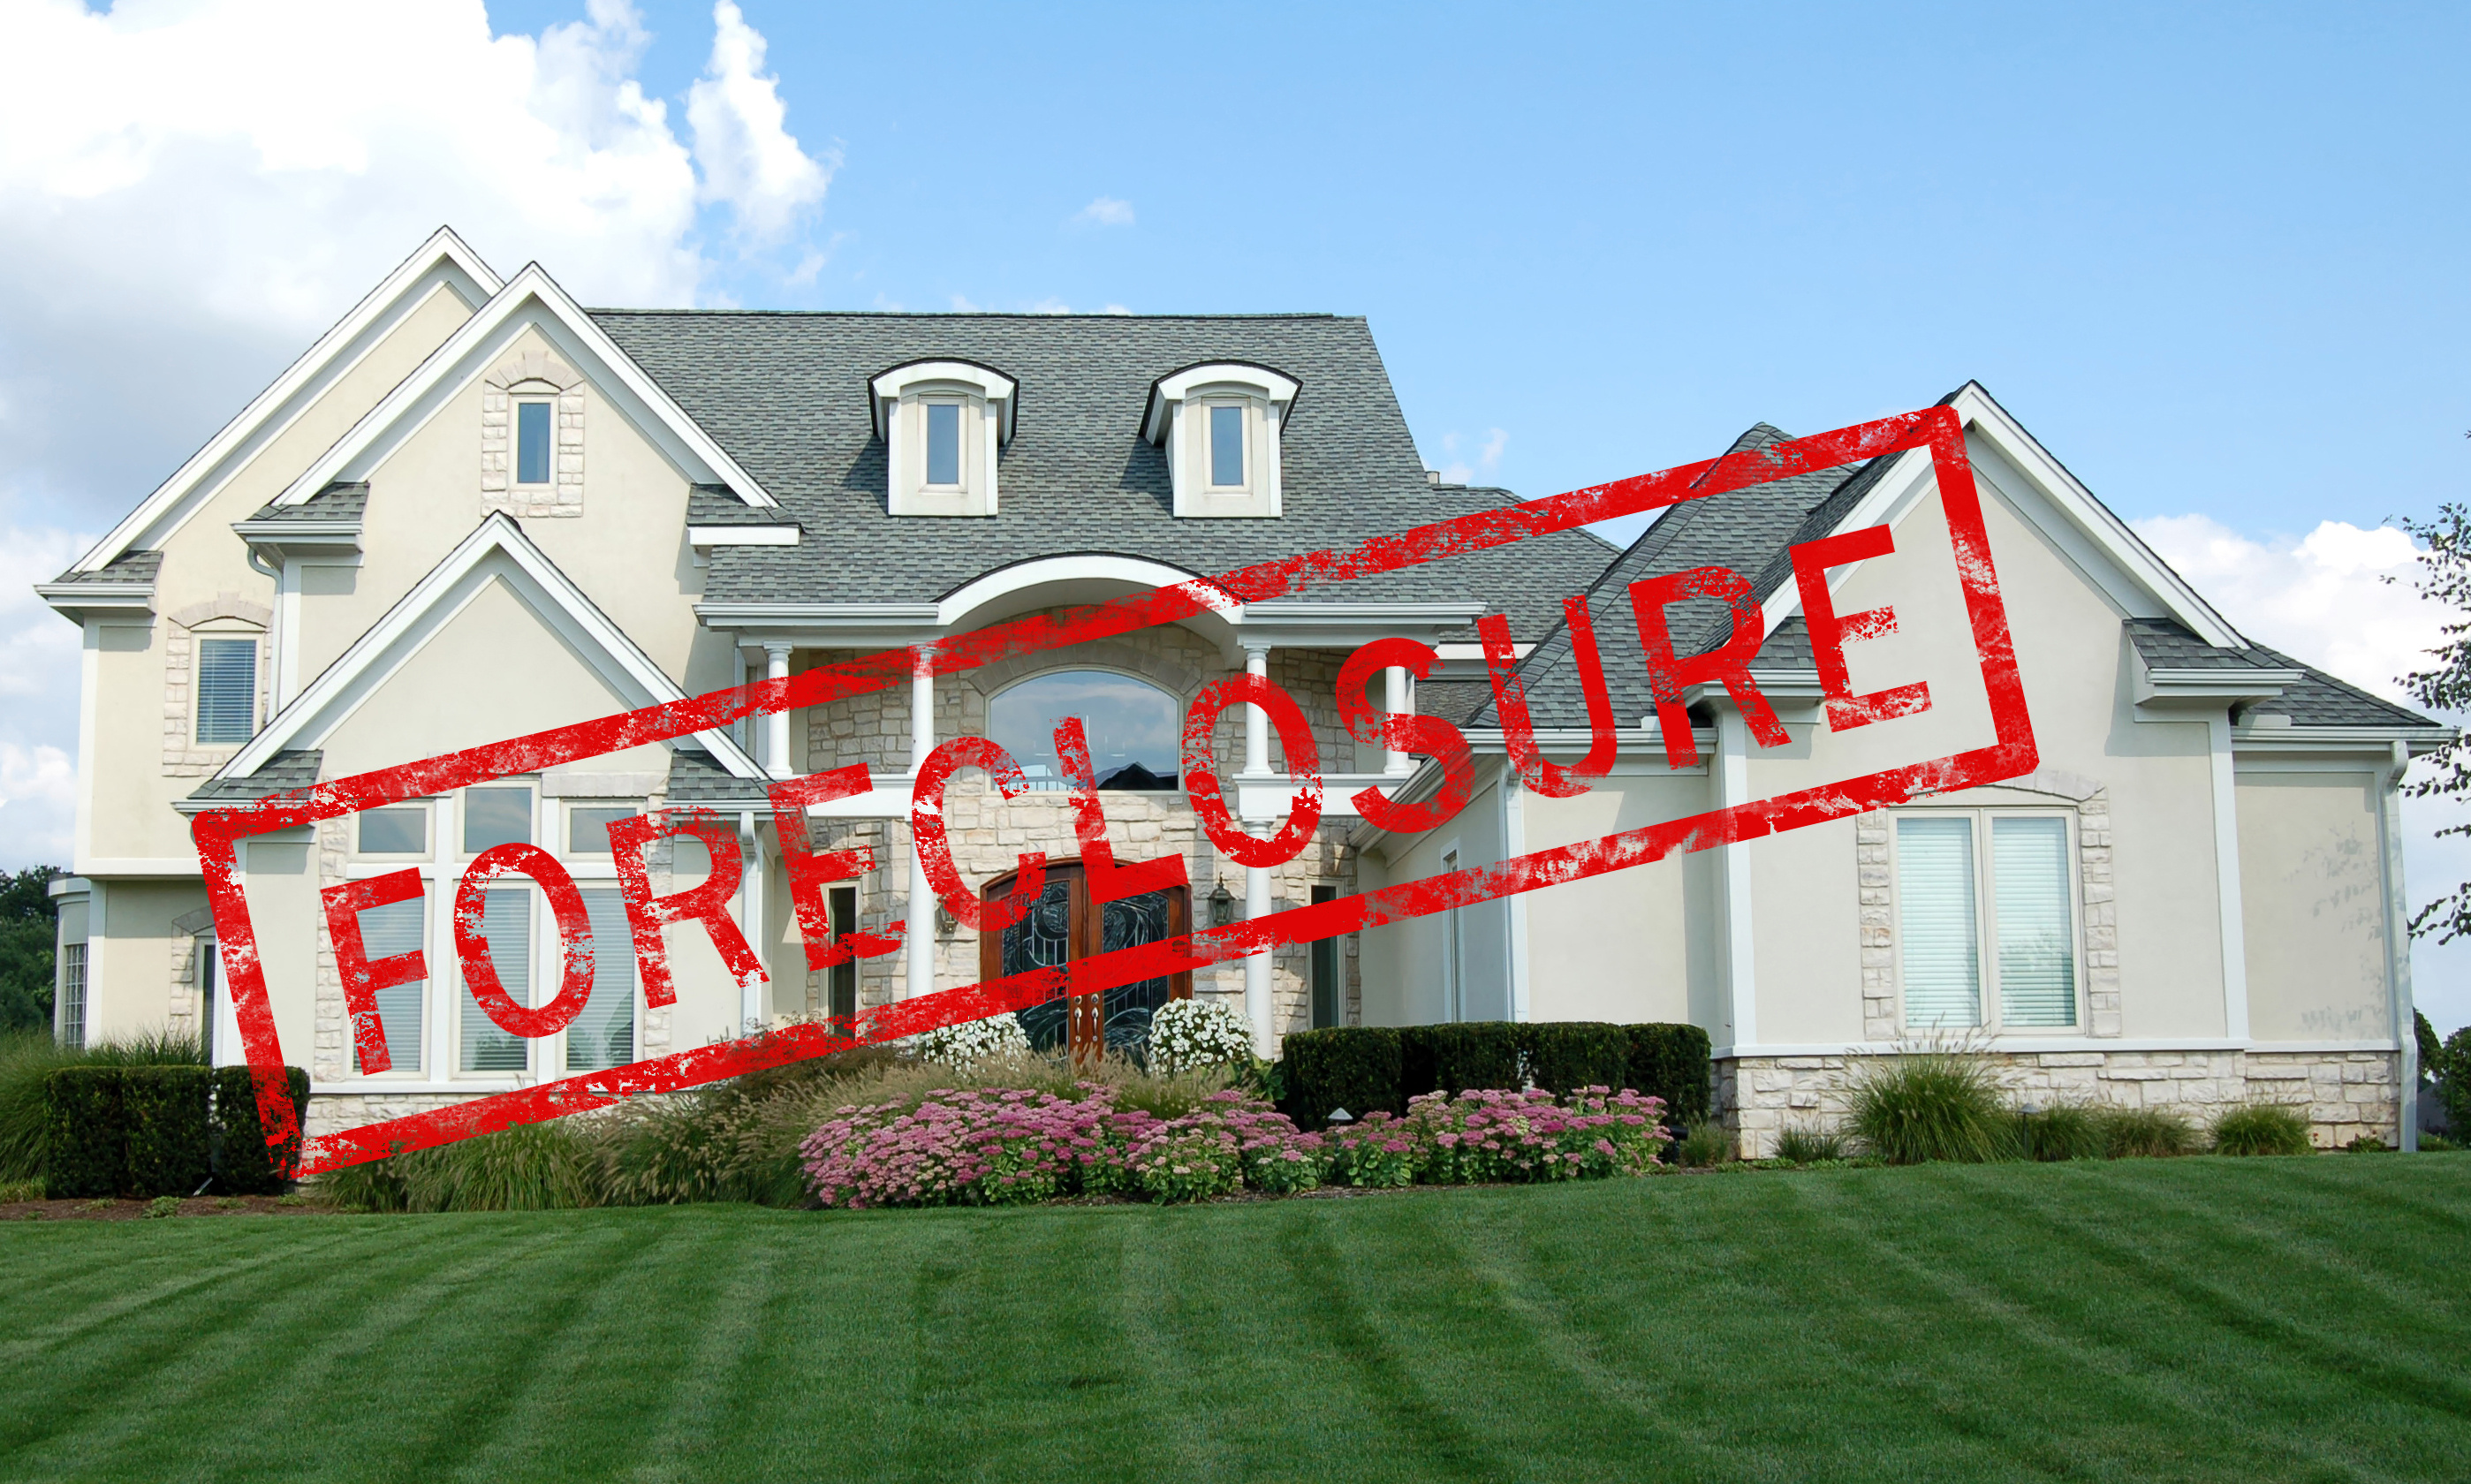 Call Taggart and Associates, Inc. to discuss valuations of Shawnee foreclosures